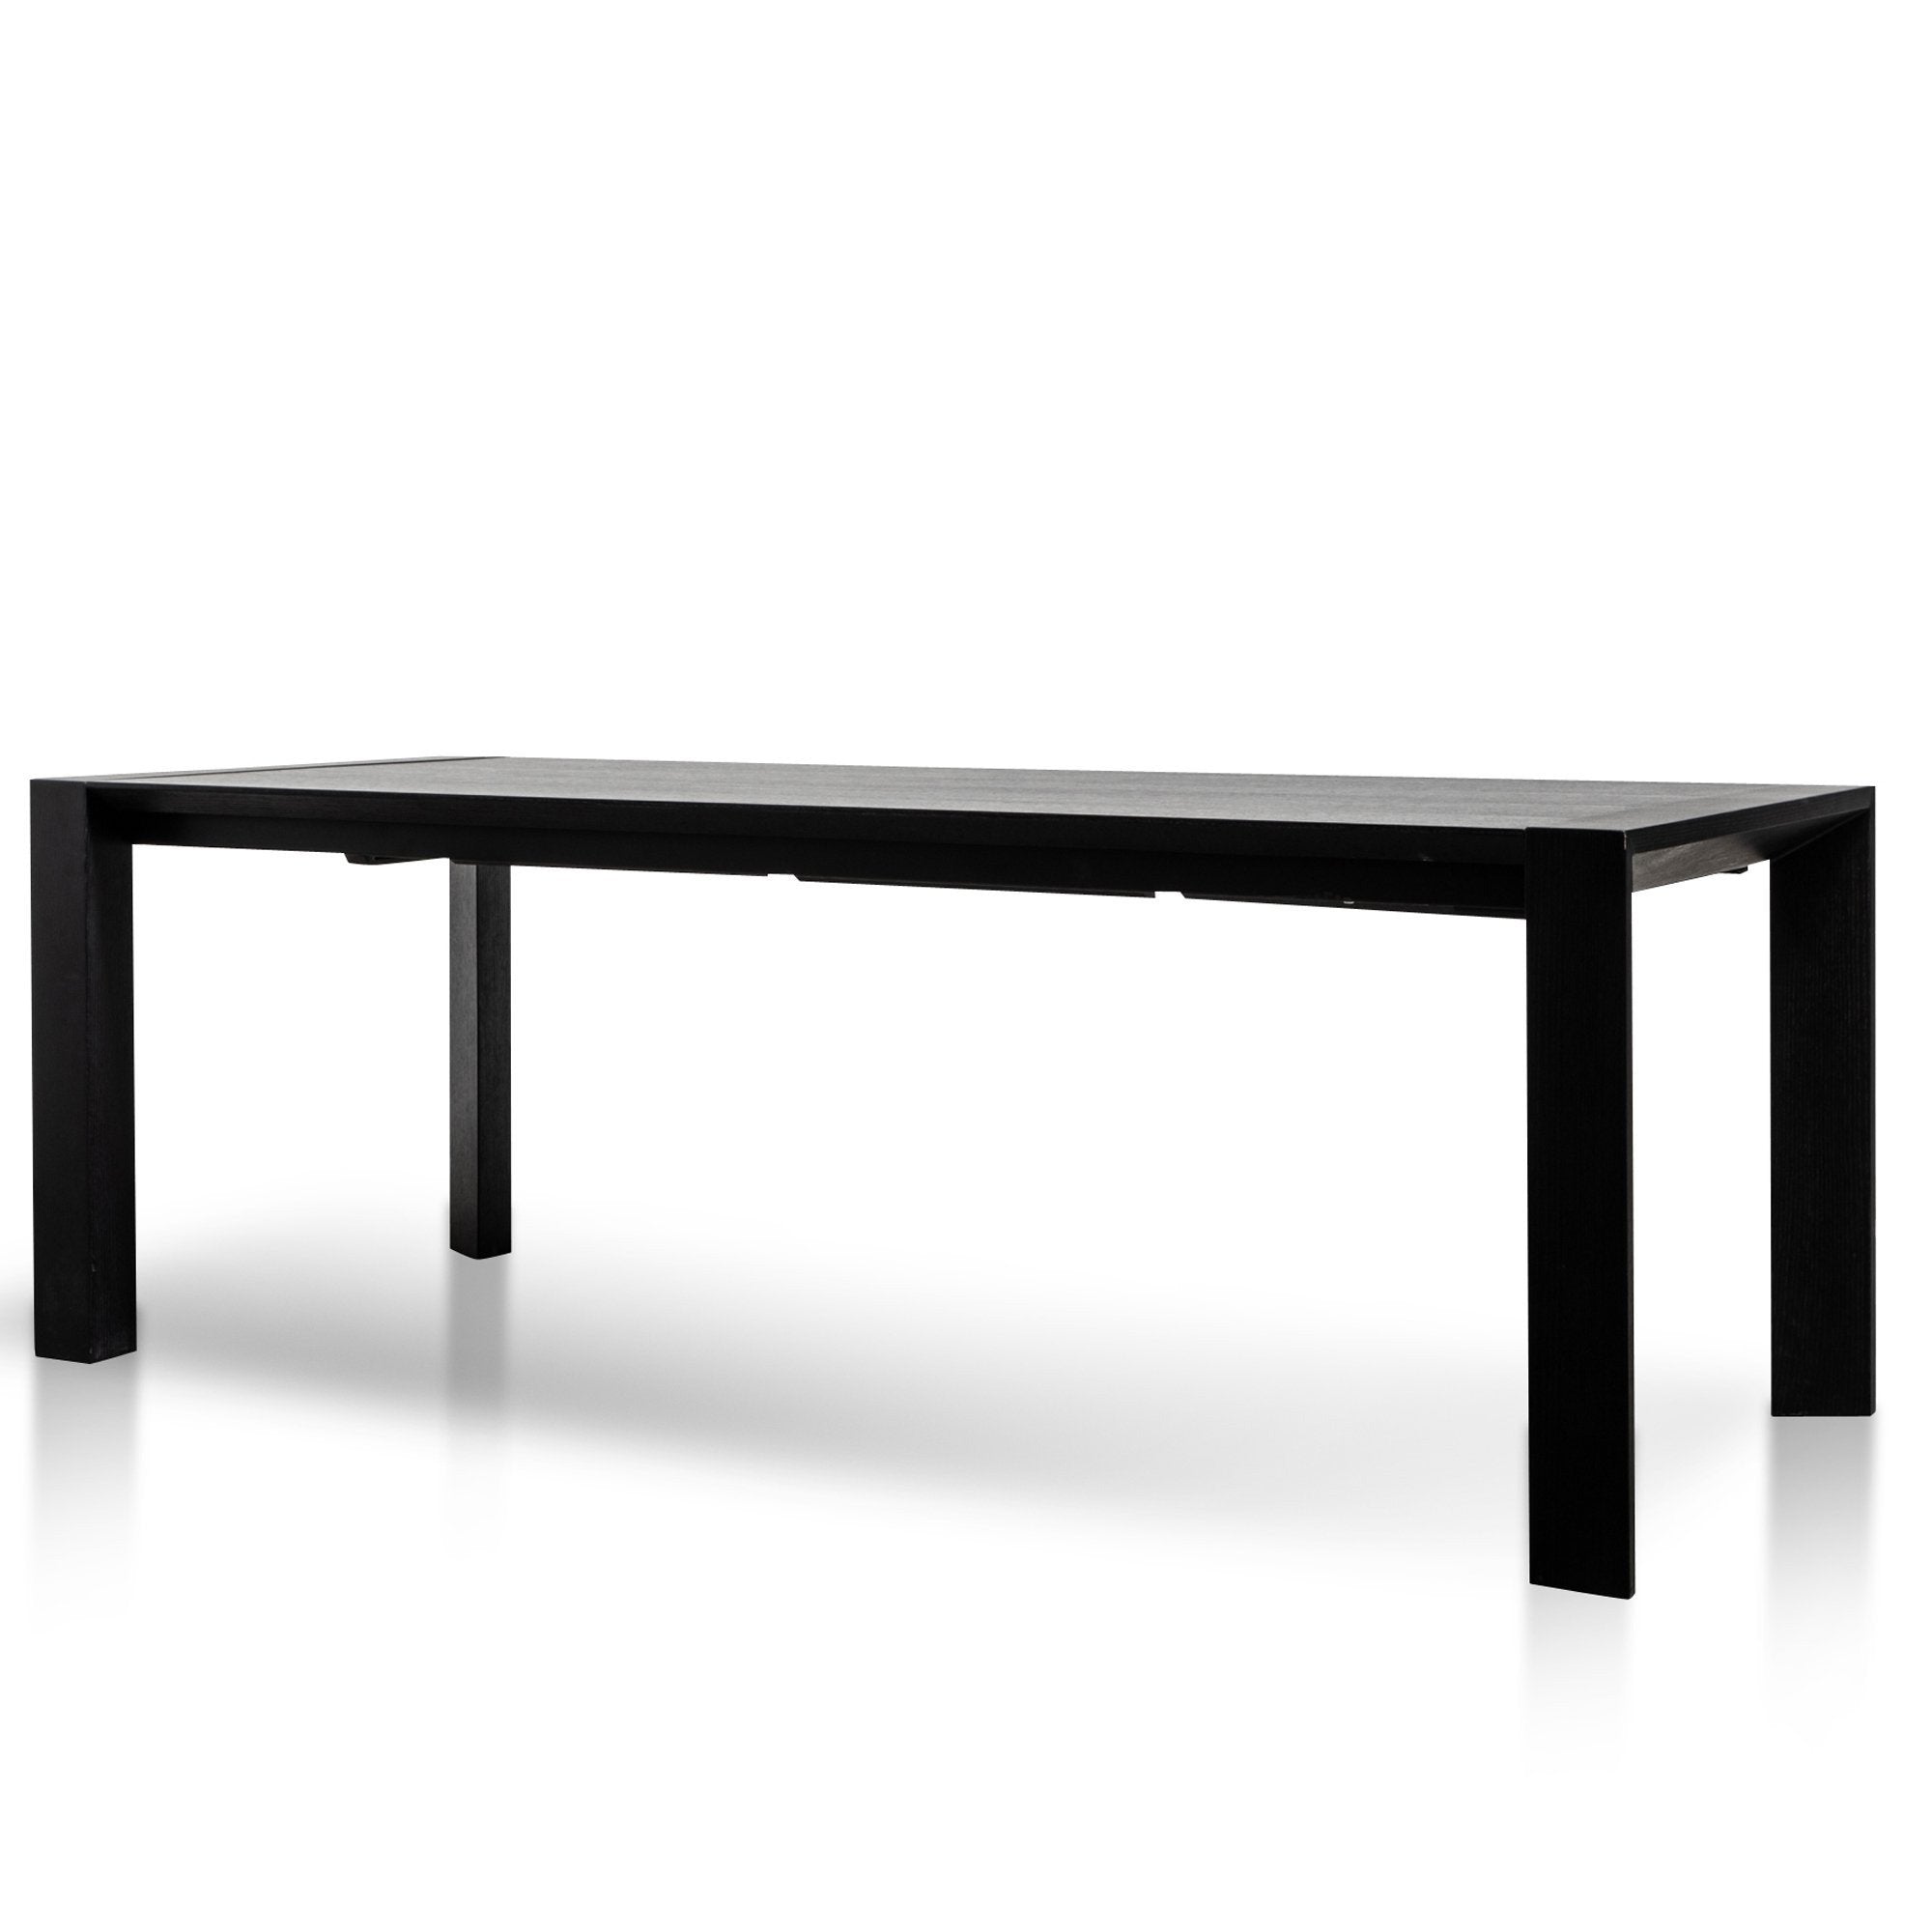 Baxter 2.1M-3.5M Extendable MDF Dining Table - Black